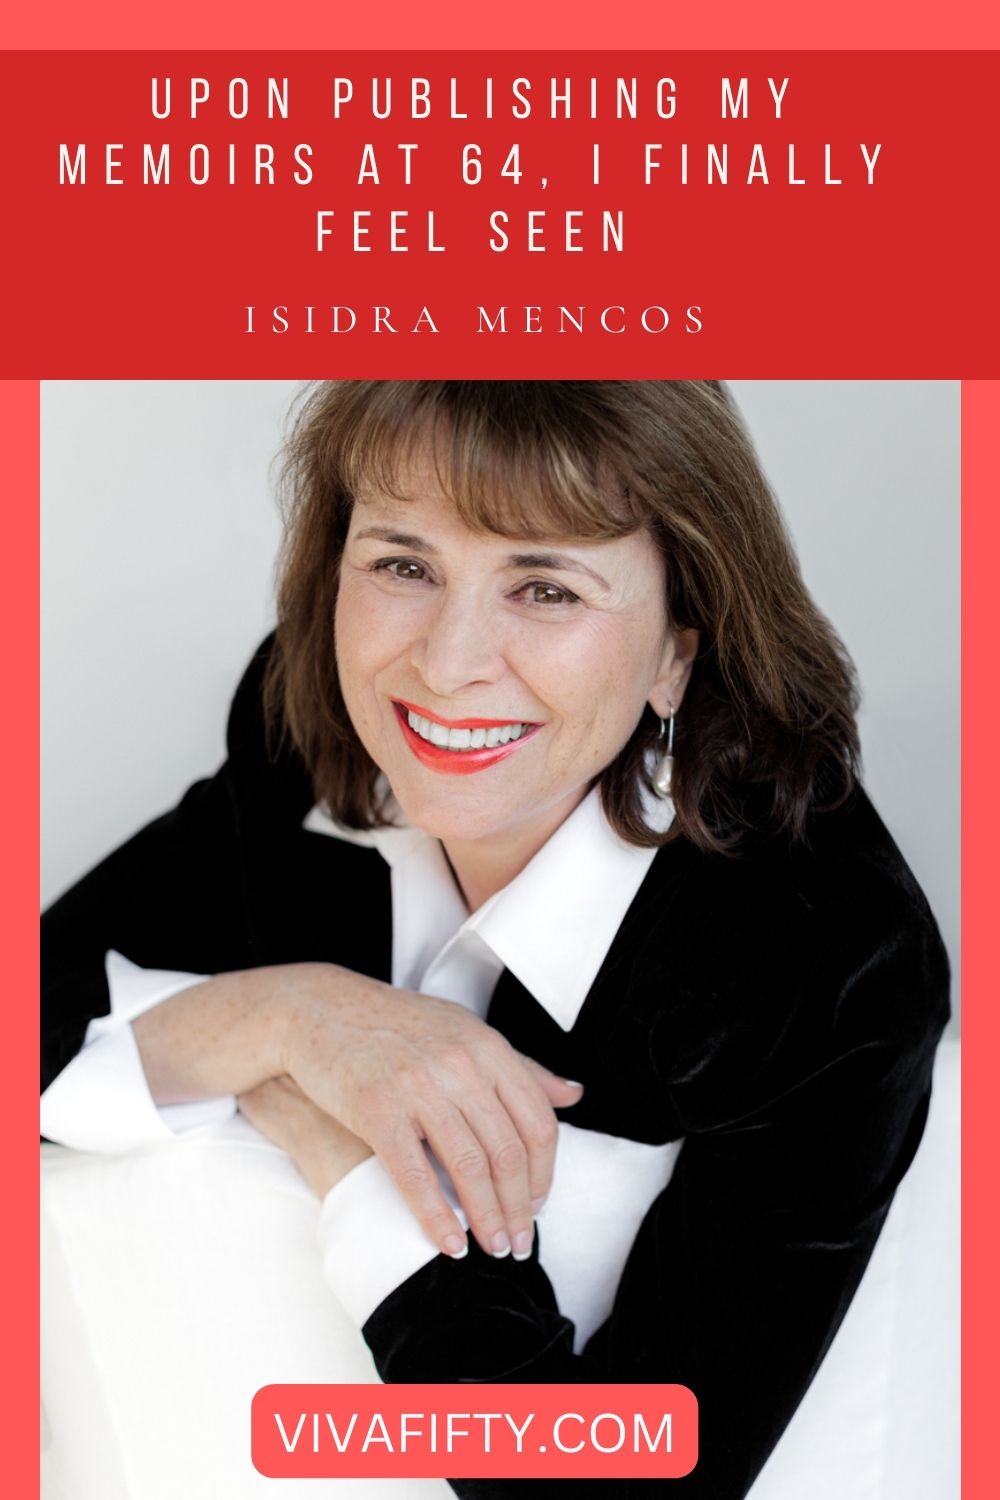 Isidra Mencos publishes her memoir Promenade of Desire, a coming-of-age story that takes place during the Spanish transition to democracy.